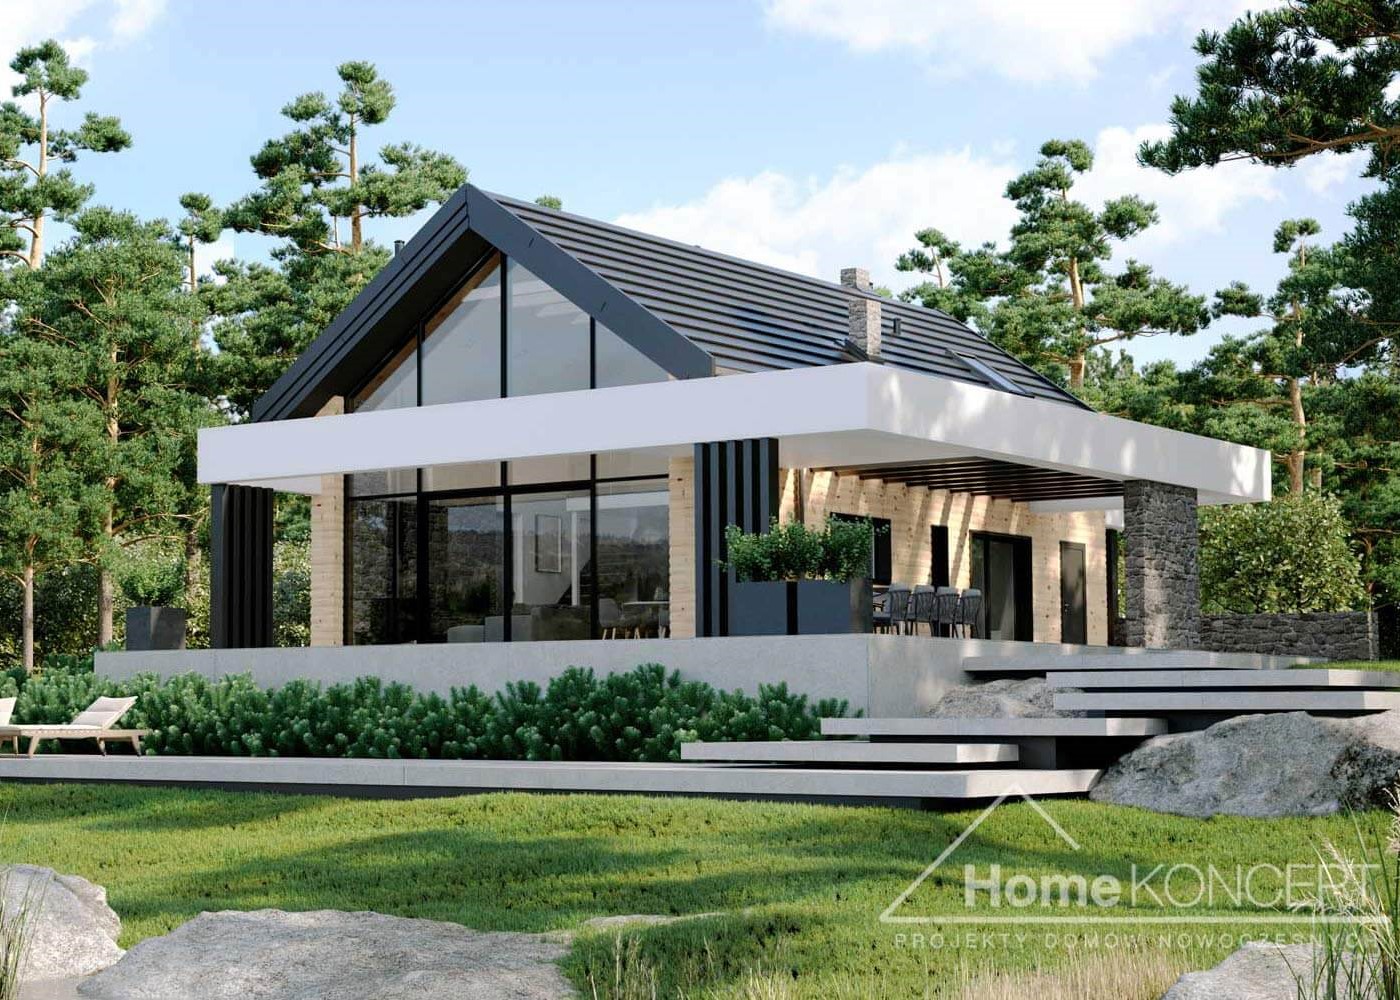 energy-efficient and passive houses